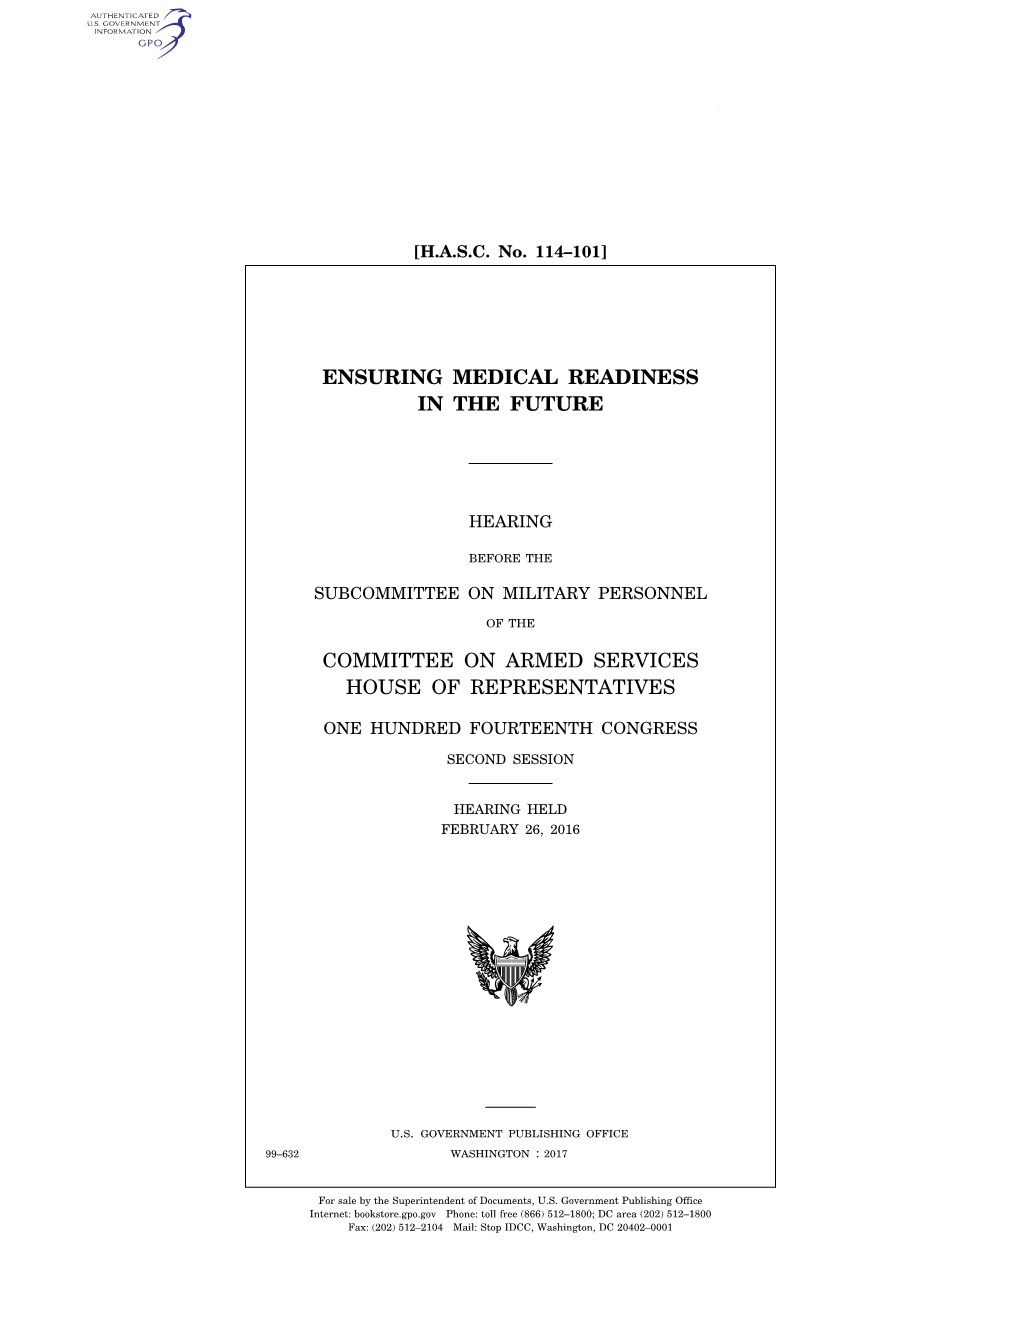 Ensuring Medical Readiness in the Future Committee On